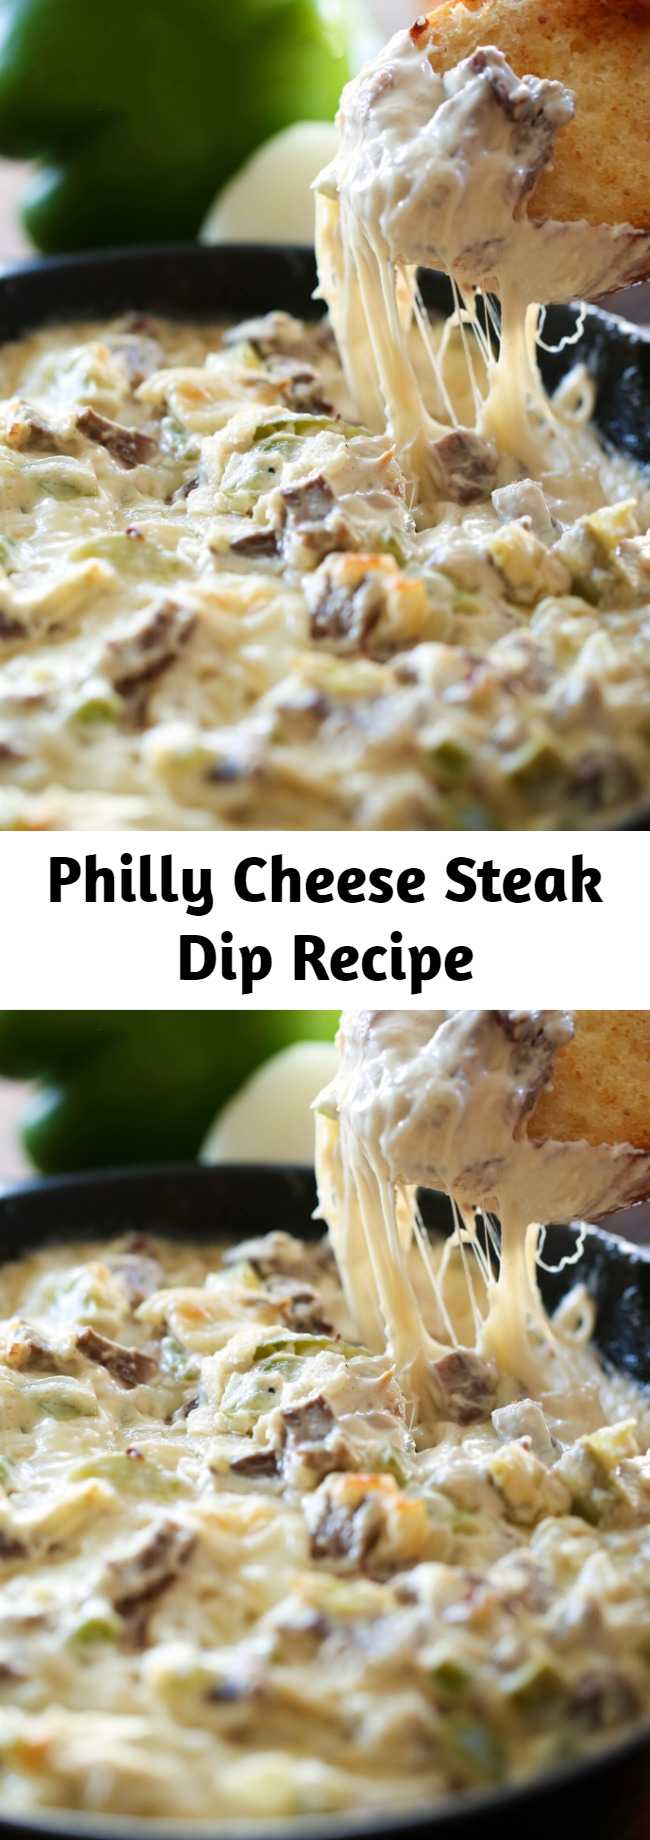 Philly Cheese Steak Dip Recipe - This Philly Cheese Steak Dip is phenomenal and truly tastes JUST like you are biting into that beloved and well sought-after sandwich. The flavor is incredible and this recipe is super unique and exciting!